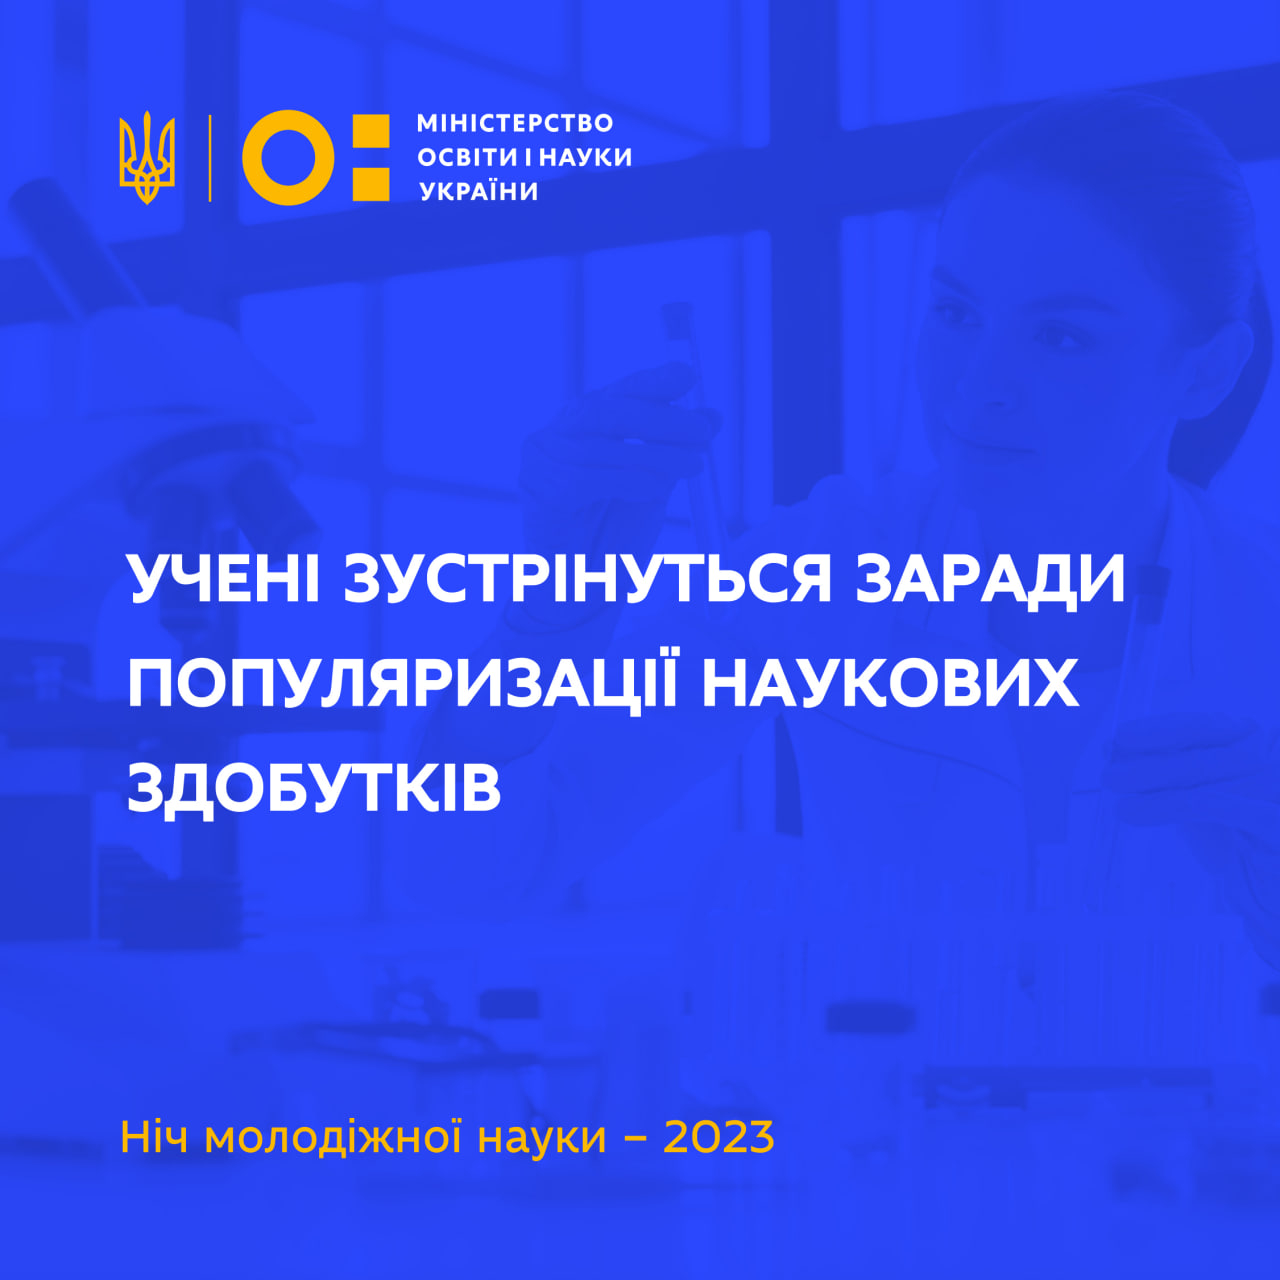 “Night of Youth Science – 2023 in conditions of war”: scientists are invited to take part in a popular science event